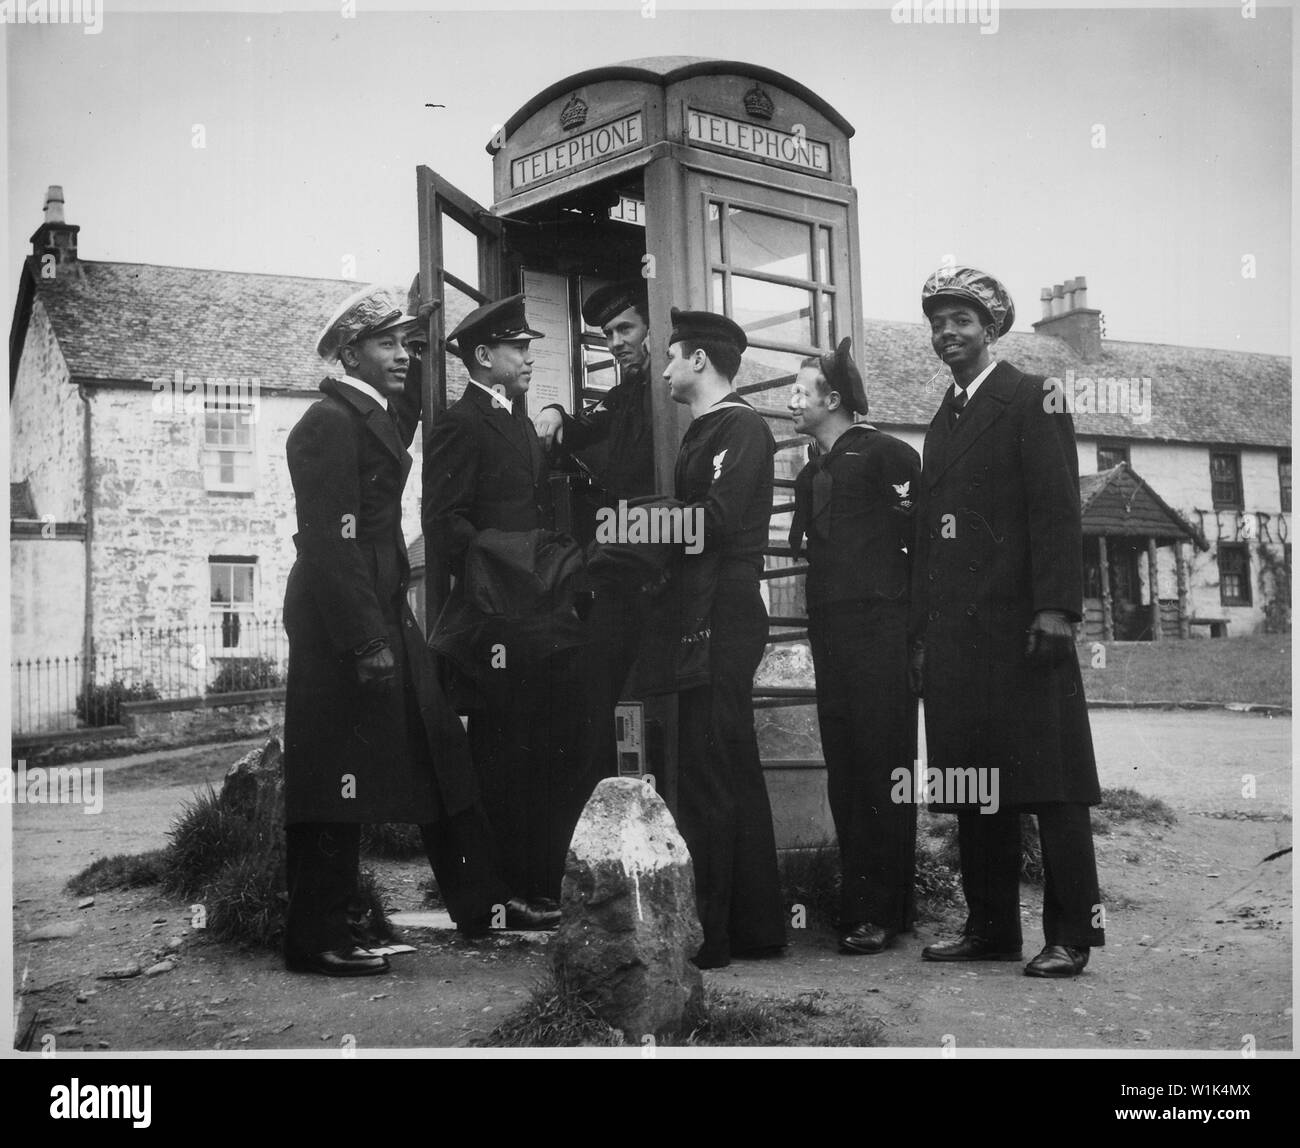 ... U.S. Coast Guardsmen make use of a telephone booth in Scotland. They are on liberty from their ship, a Coast Guard combat cutter engaged in convoy escort duty., ca. 1941 - ca. 1945; Scope and content:  From left to right: Officers' Cook Second Class Joseph Andy,  Officers' Steward First Class Casiano Aquino, Gunner's Mate Second Class Vincent G. Igoe, Electrician's Mate Second Class George Trigony,  Radioman Third Class Carlton Lee, and Officers' Steward Second Class Daniel Riley. Stock Photo